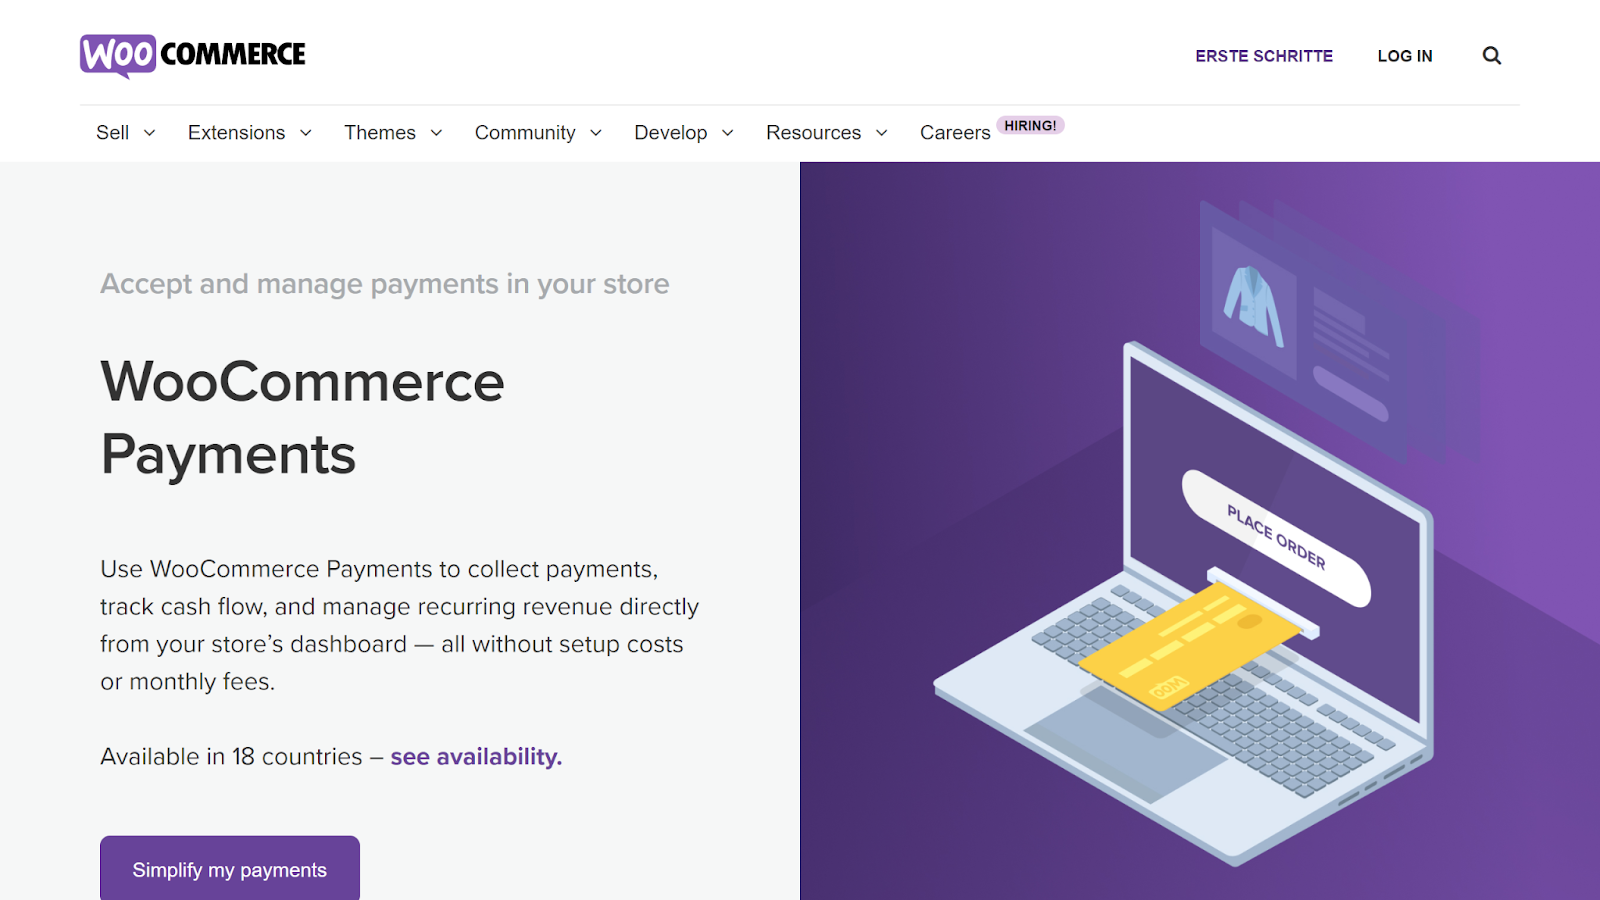 WooCommerce Payments vs Shopify